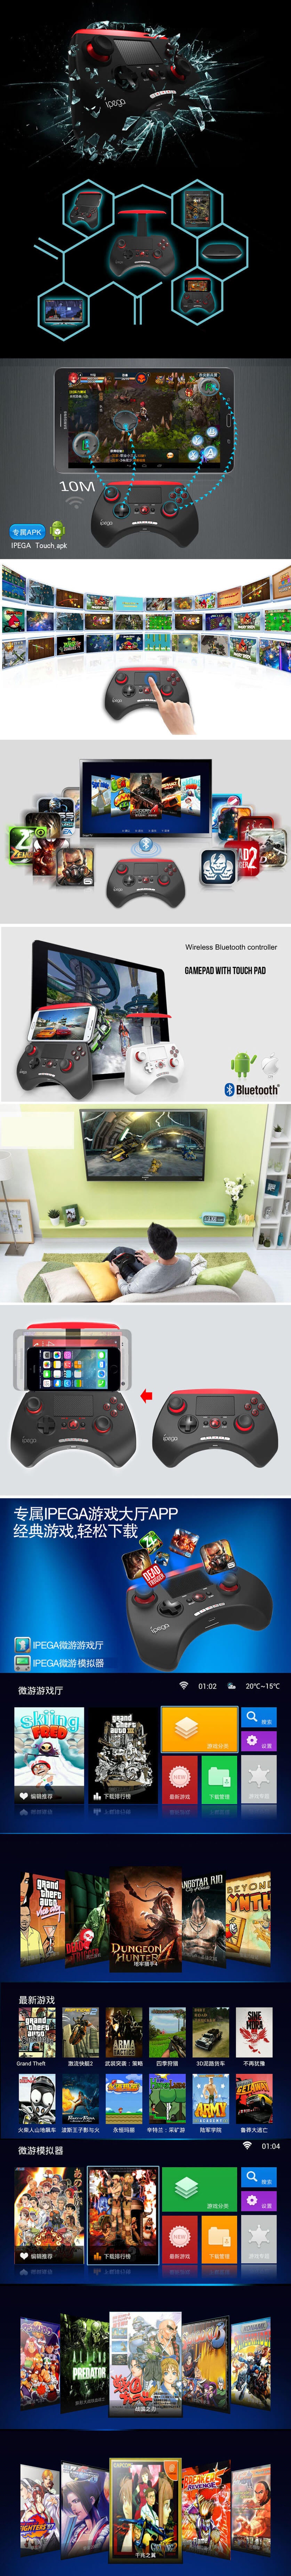 ipega-PG-9028-Bluetooth-Wireless-Game-Pad-Controller-Gamepads-Joystick-Stretchable-Holder-Touchpad-For-Android-iOS